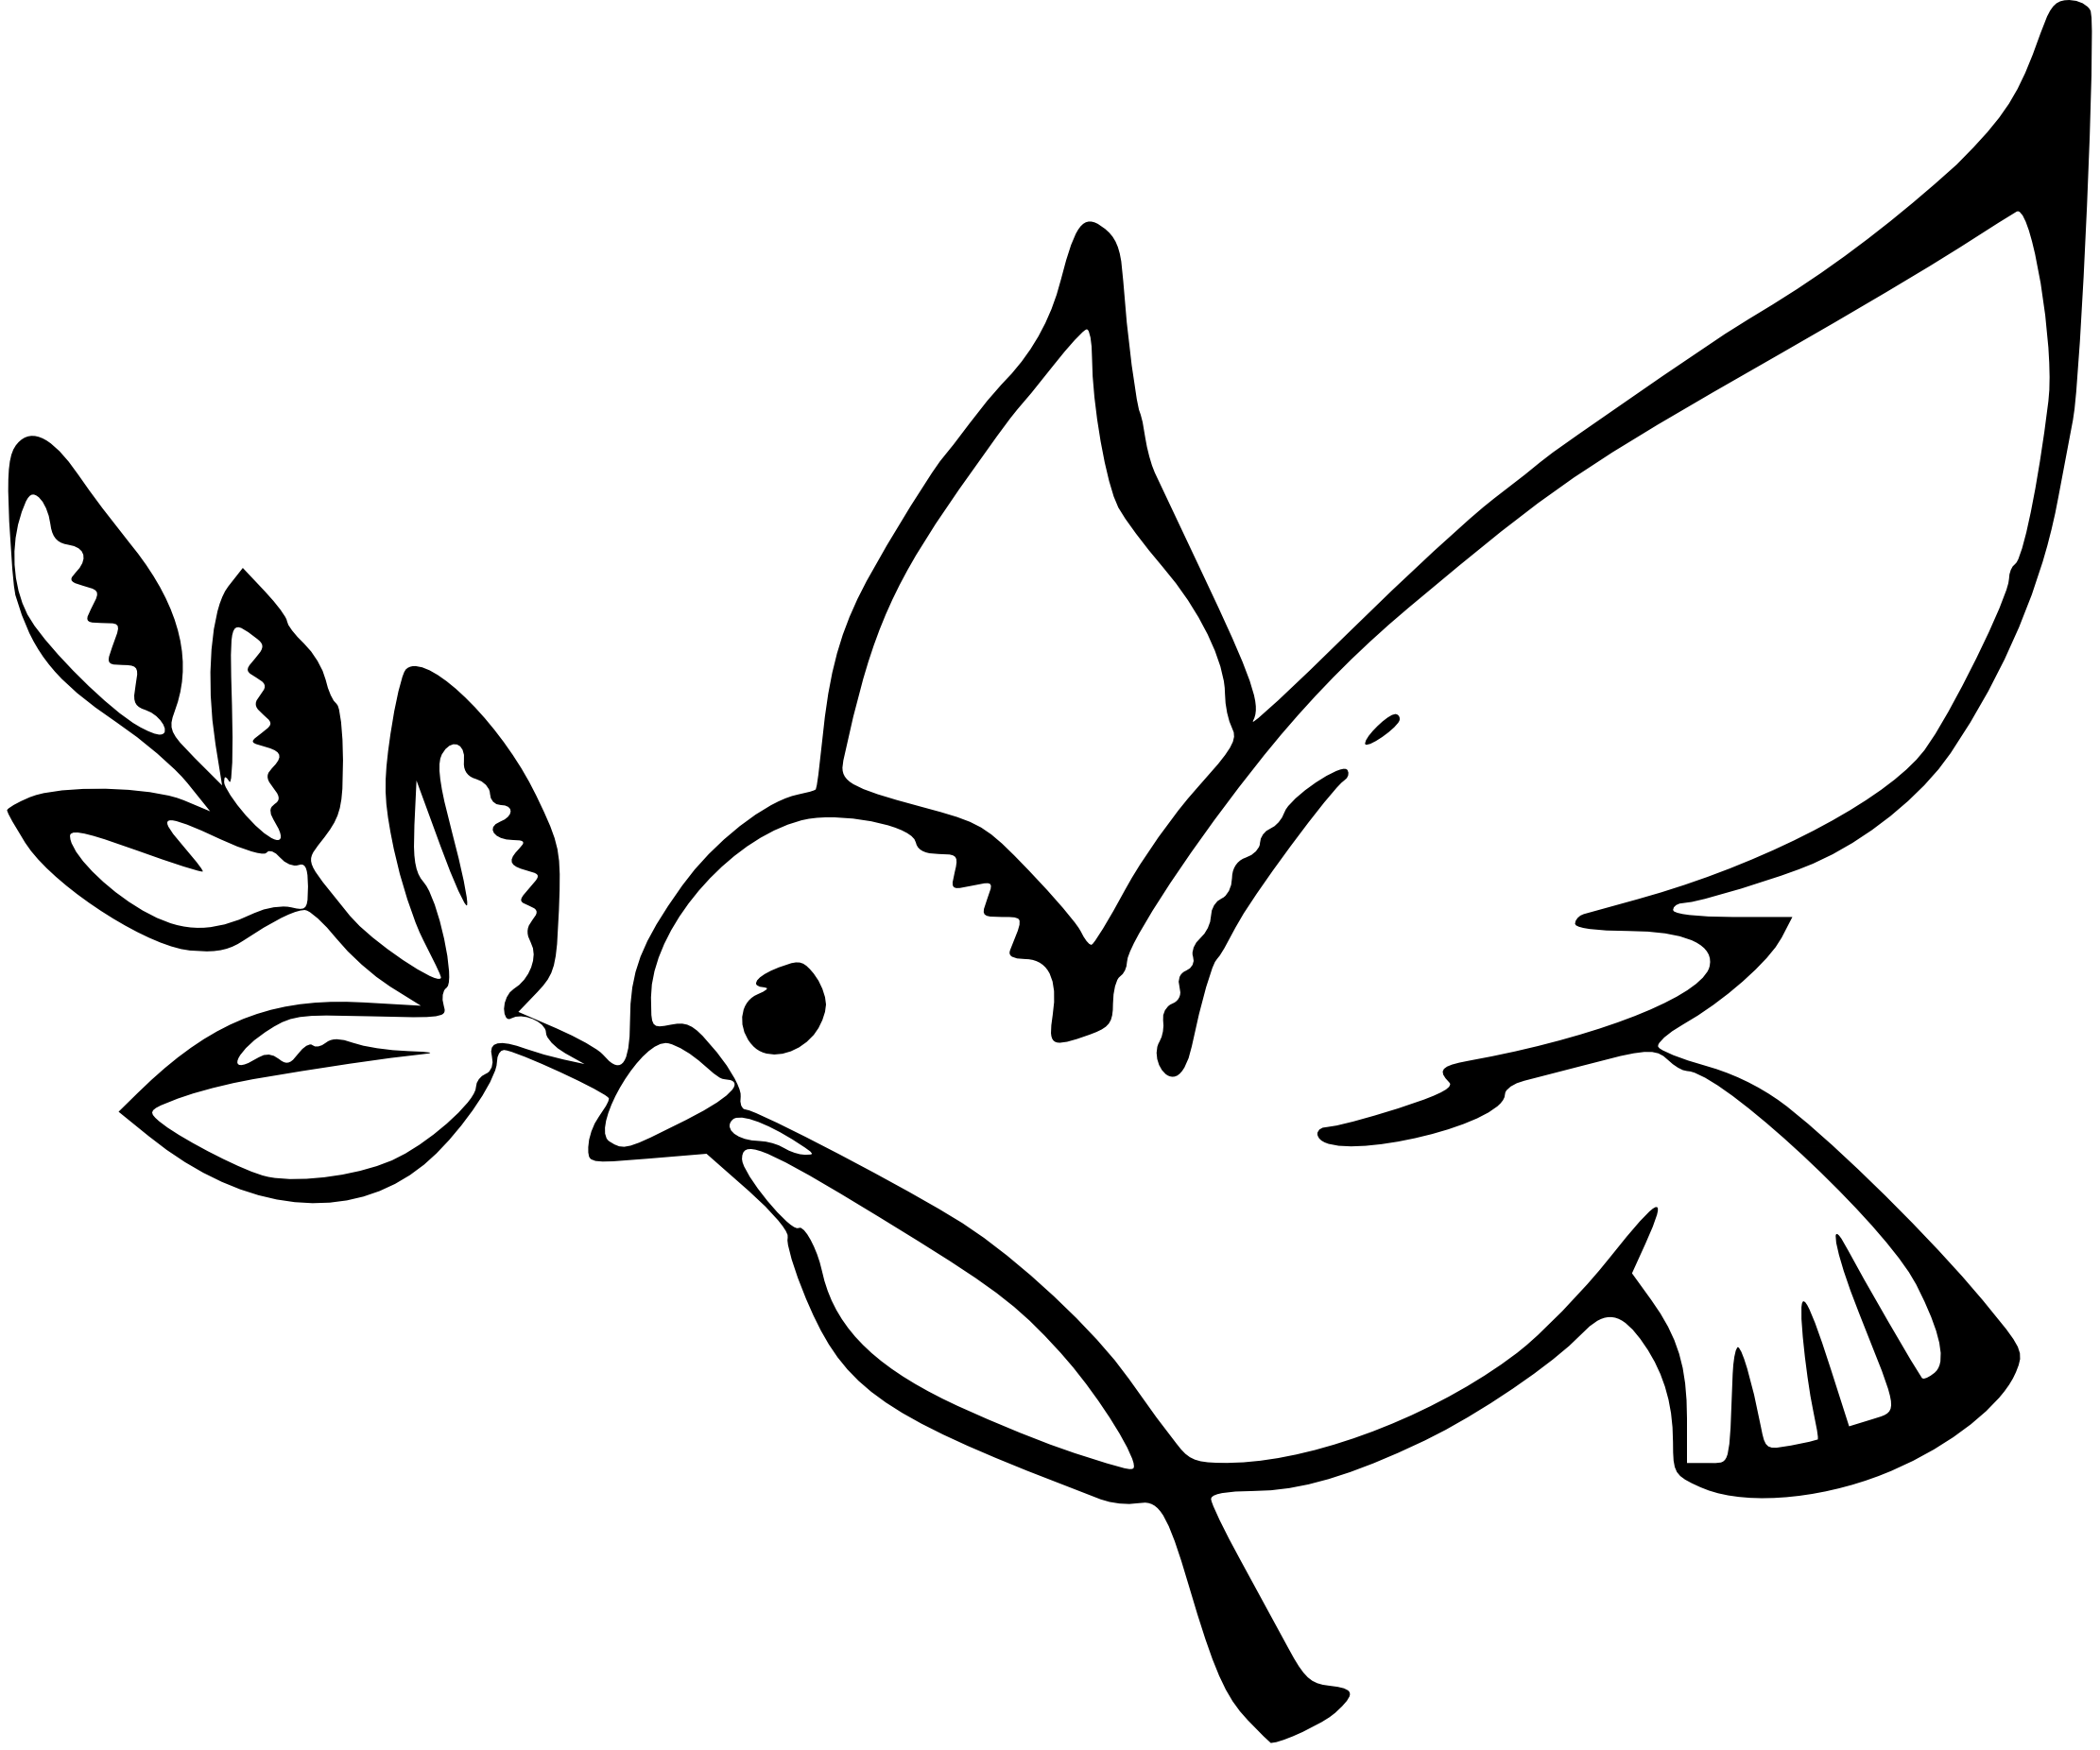 Dove Line Drawing - ClipArt Best